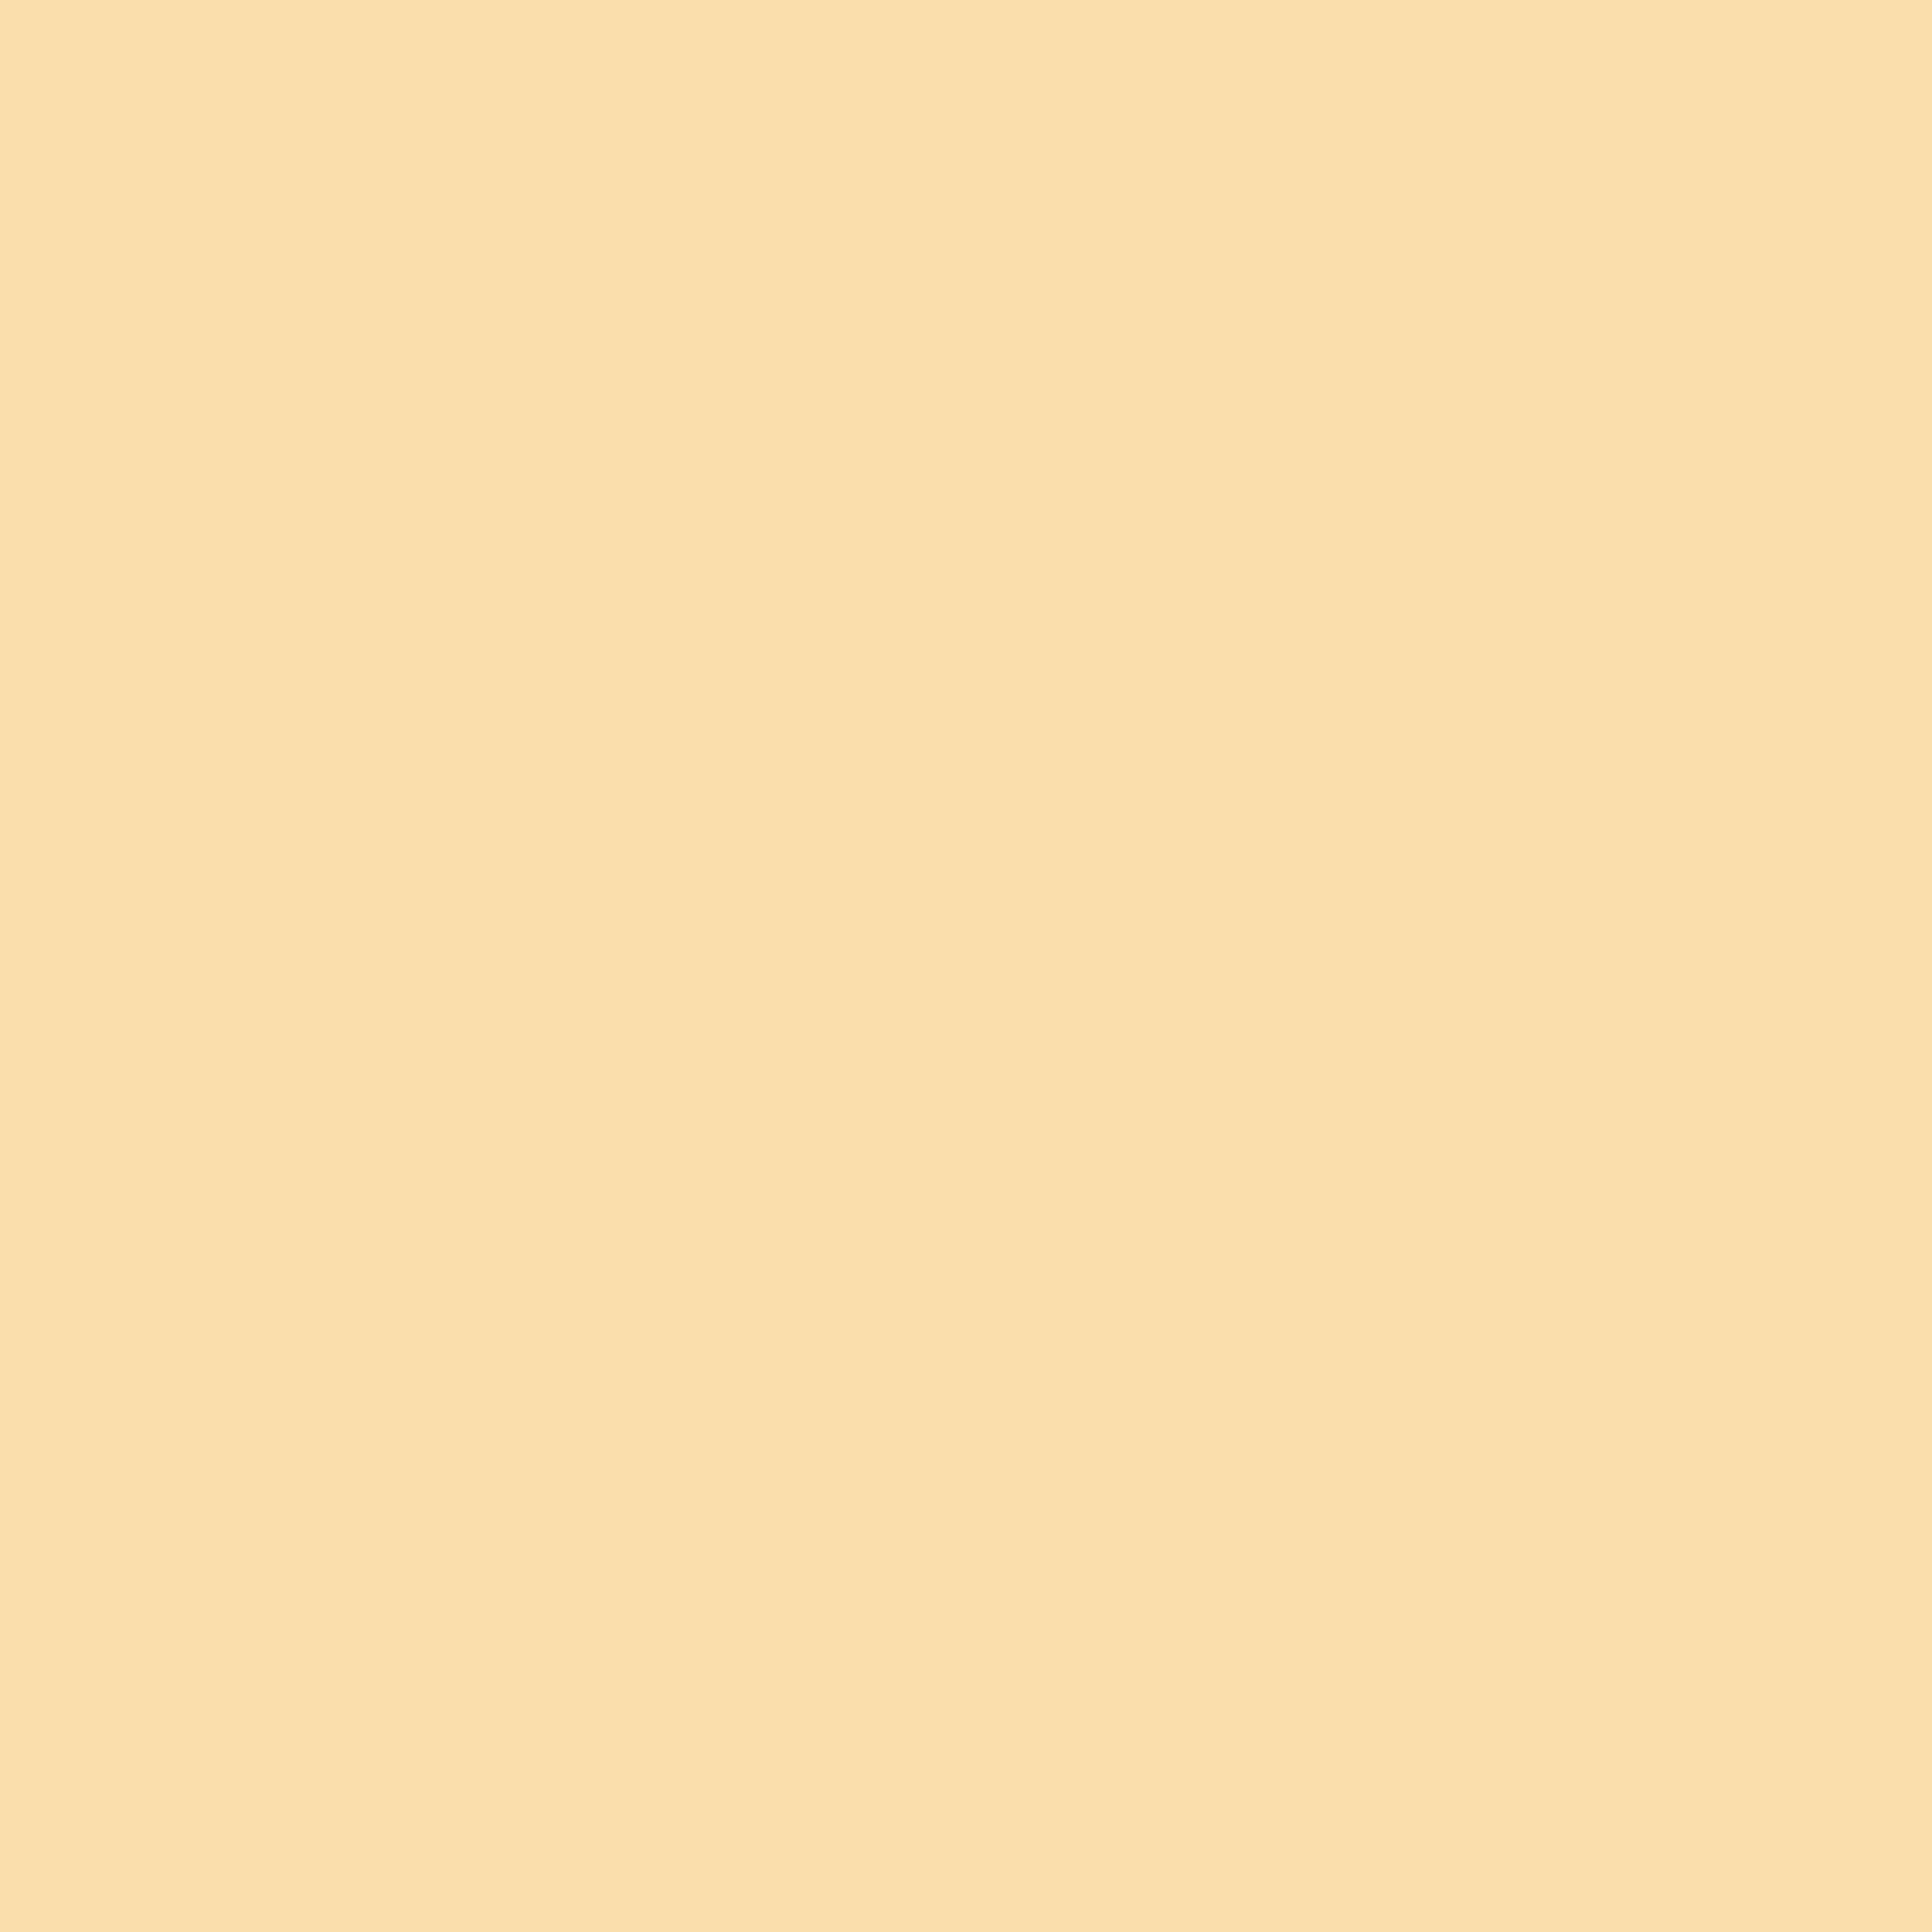 2732x2732 Peach-yellow Solid Color Background